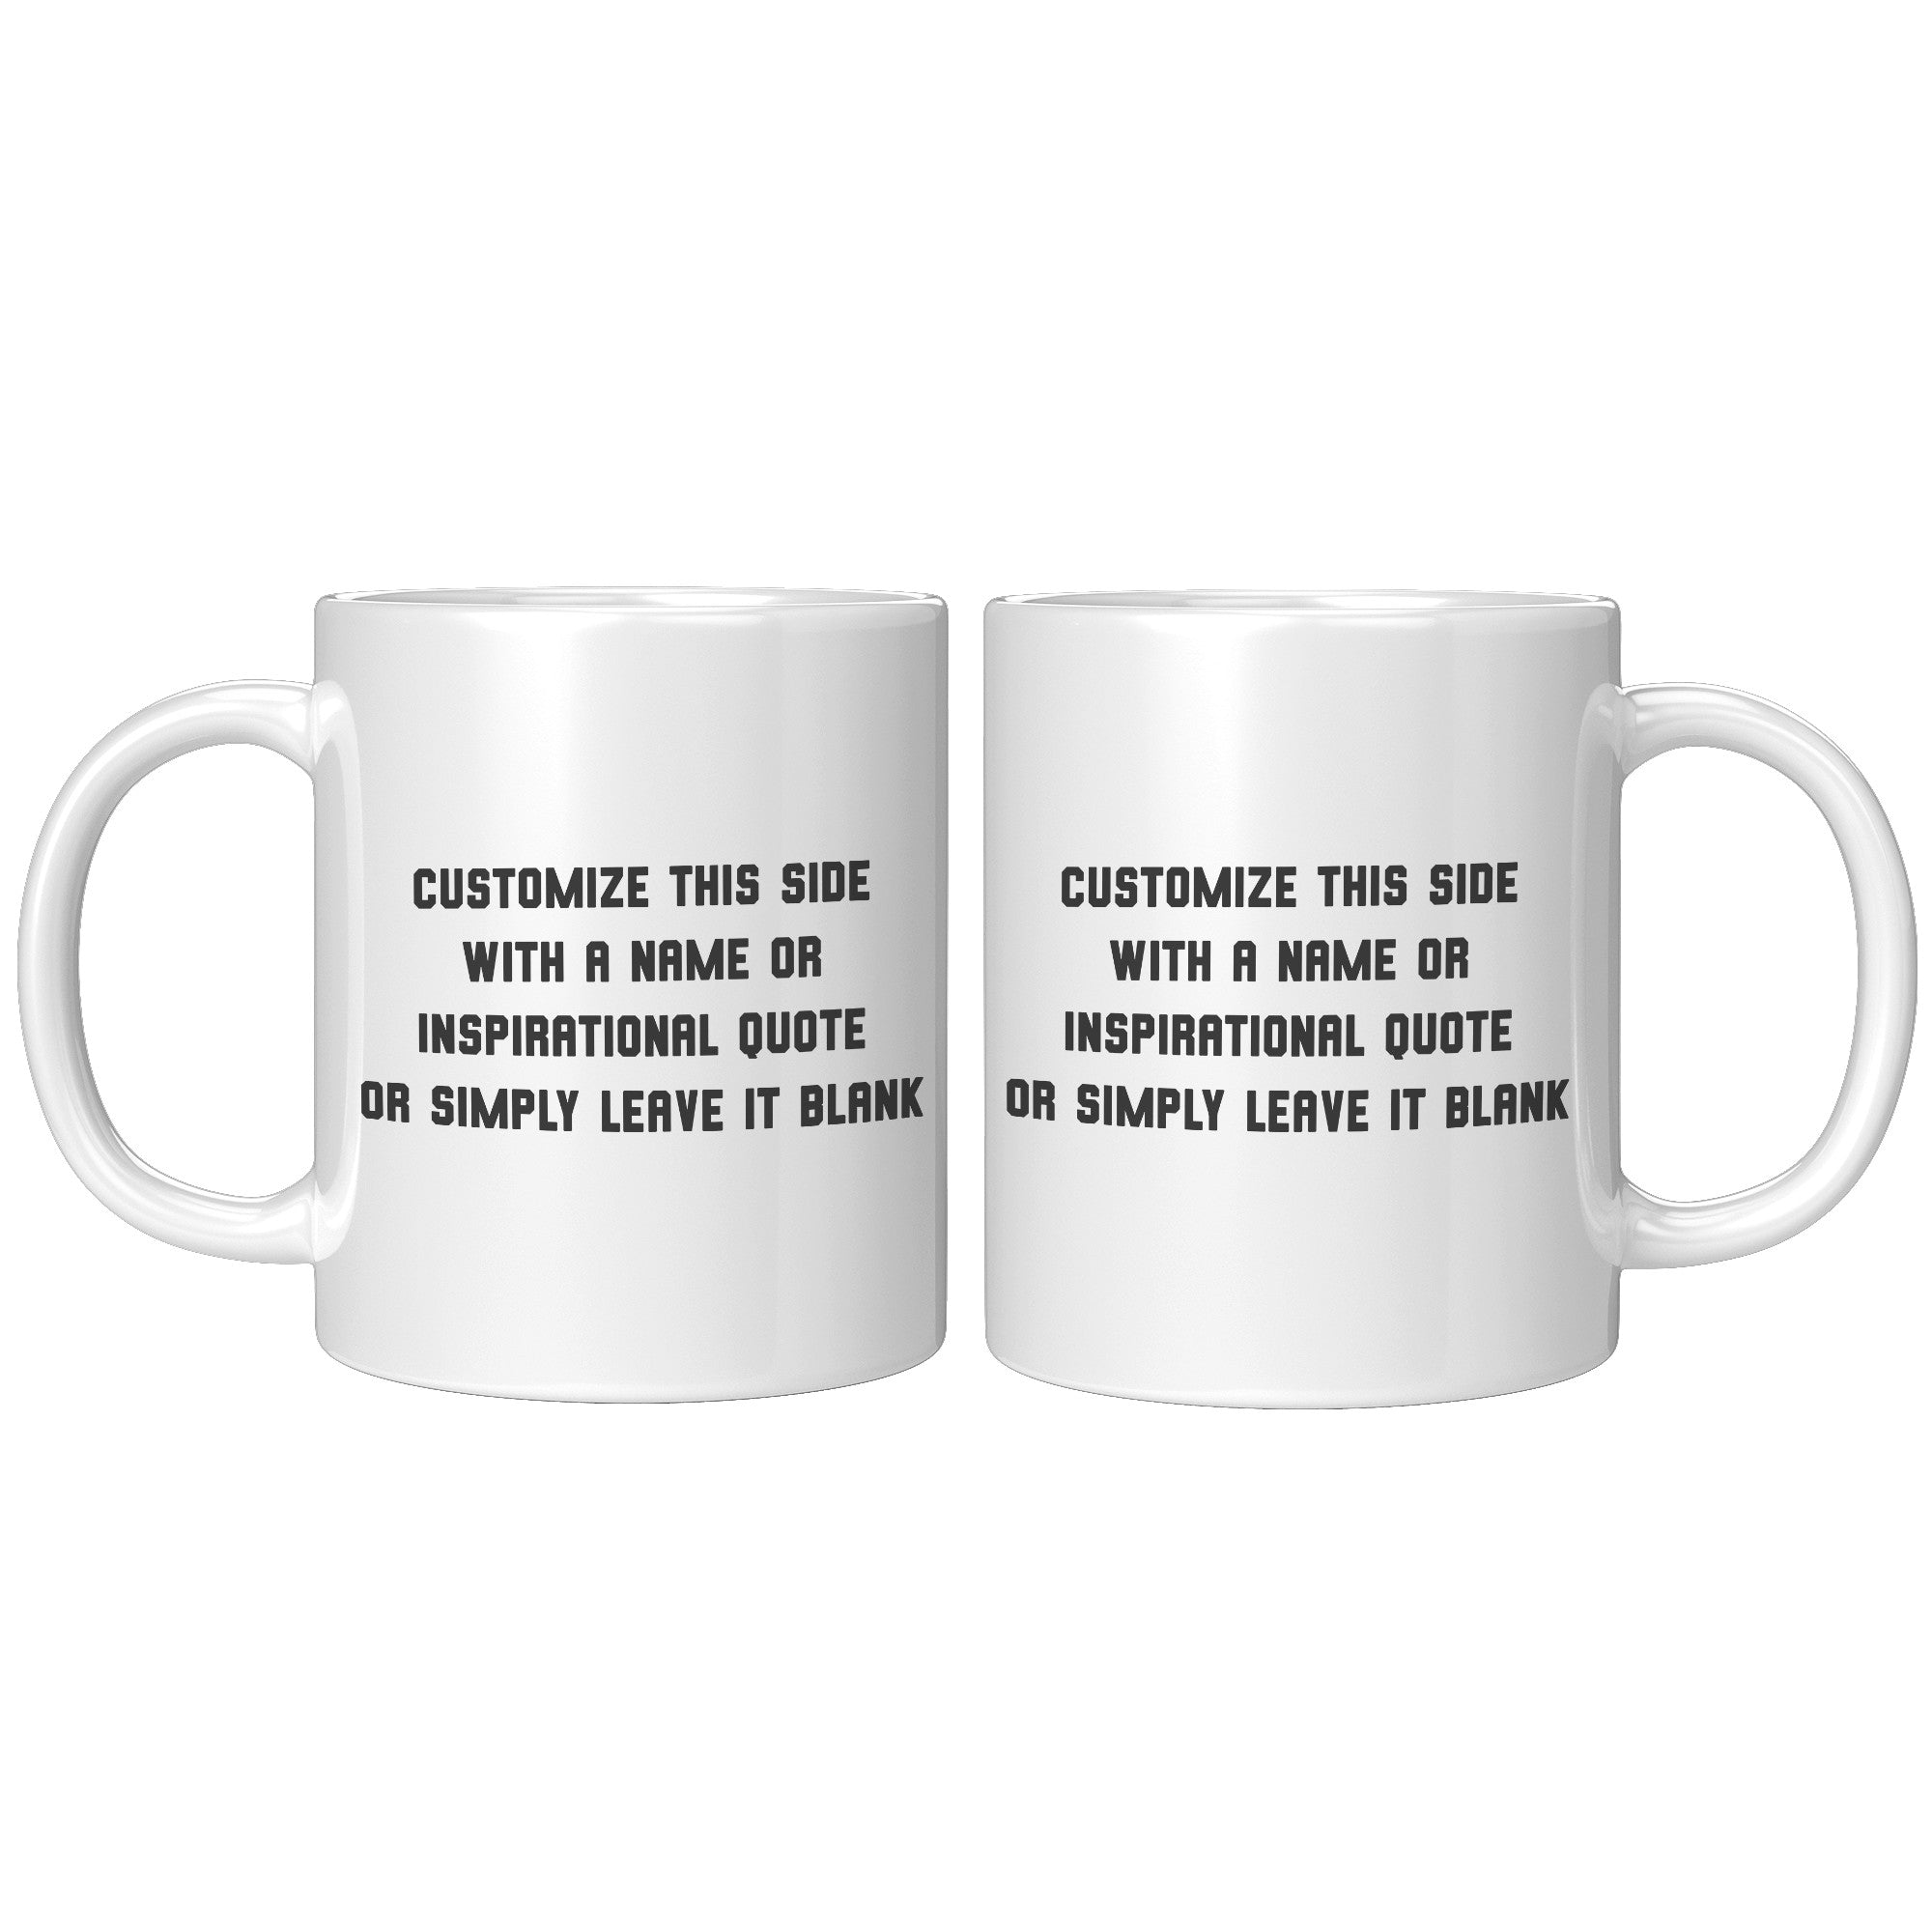 "CrossFit Funko Pop Style Mug - Male Fitness Enthusiast Coffee Cup - Unique Gift for Gym Buffs - Fun Workout-Inspired Drinkware"